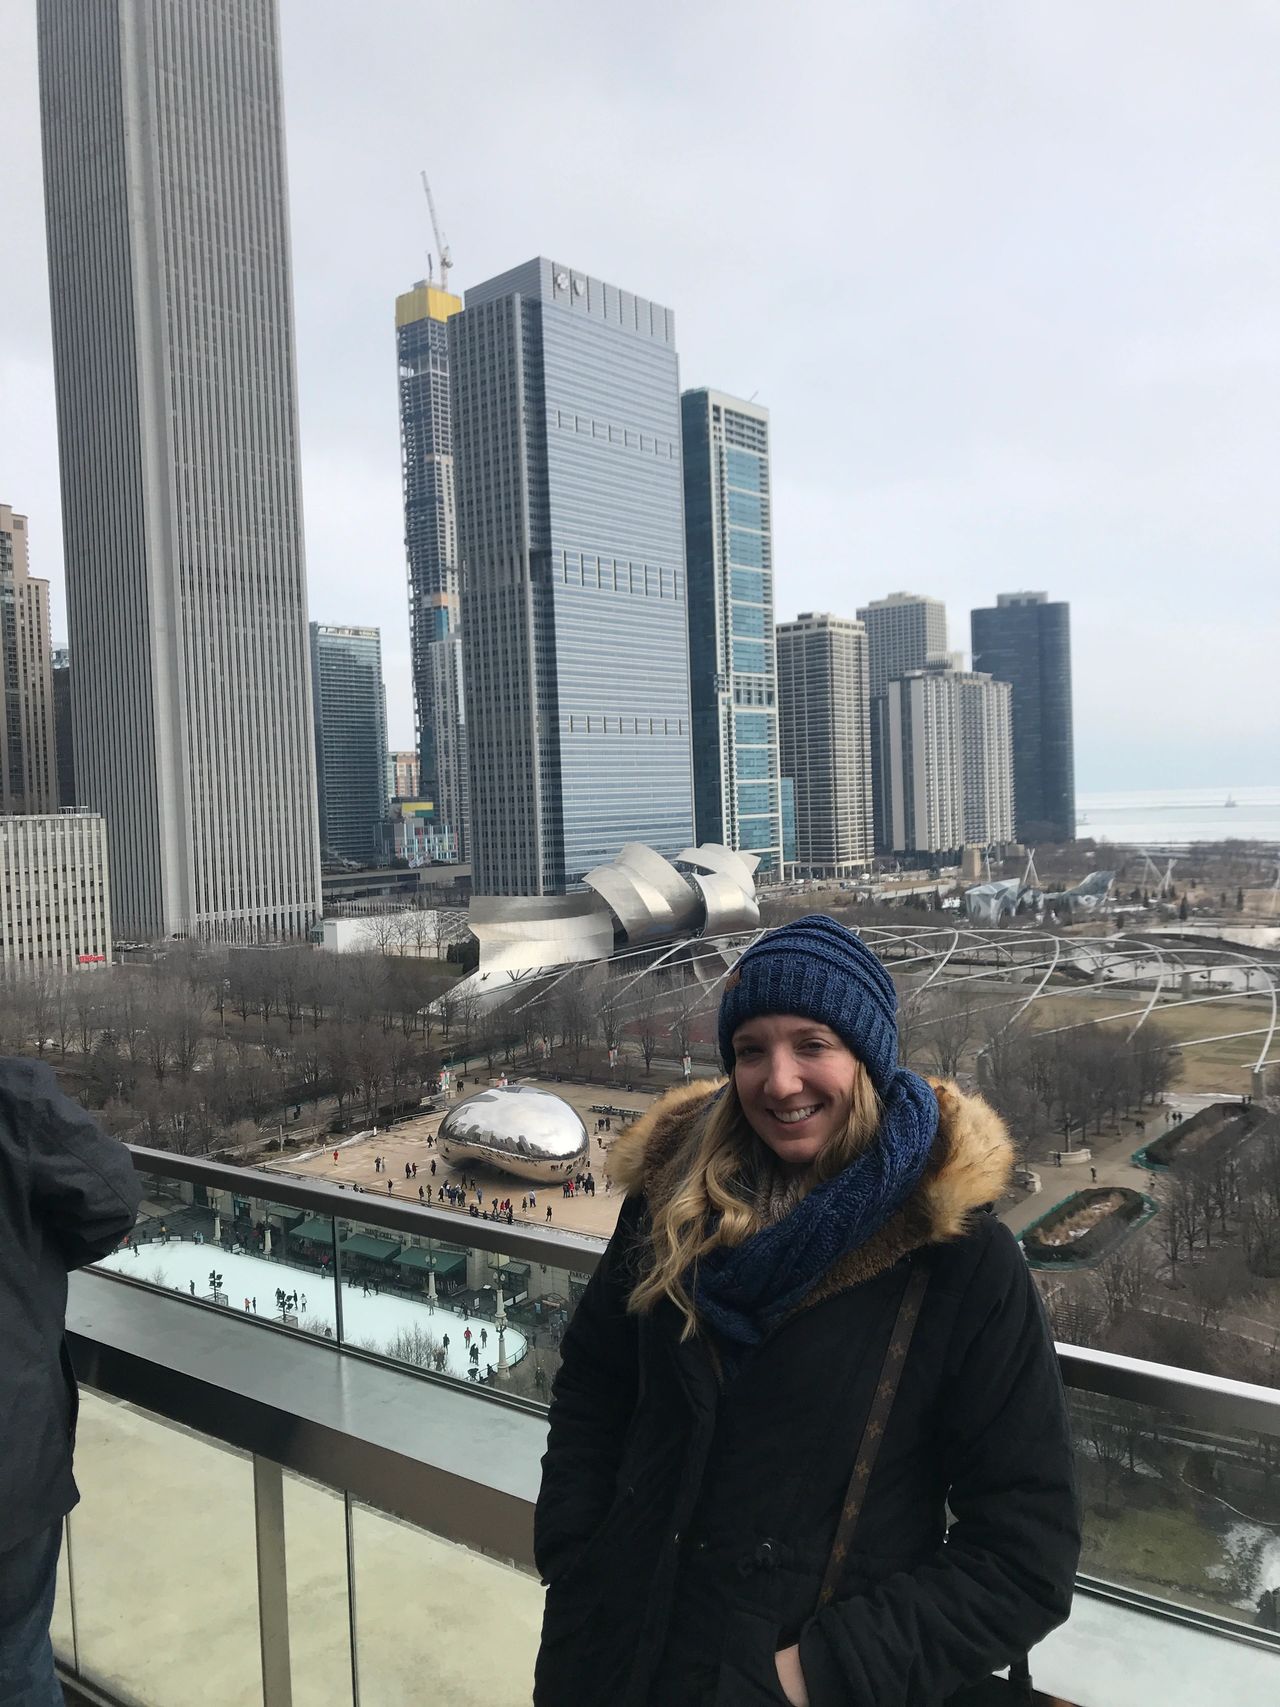 A view of Millennium Park from the rooftop